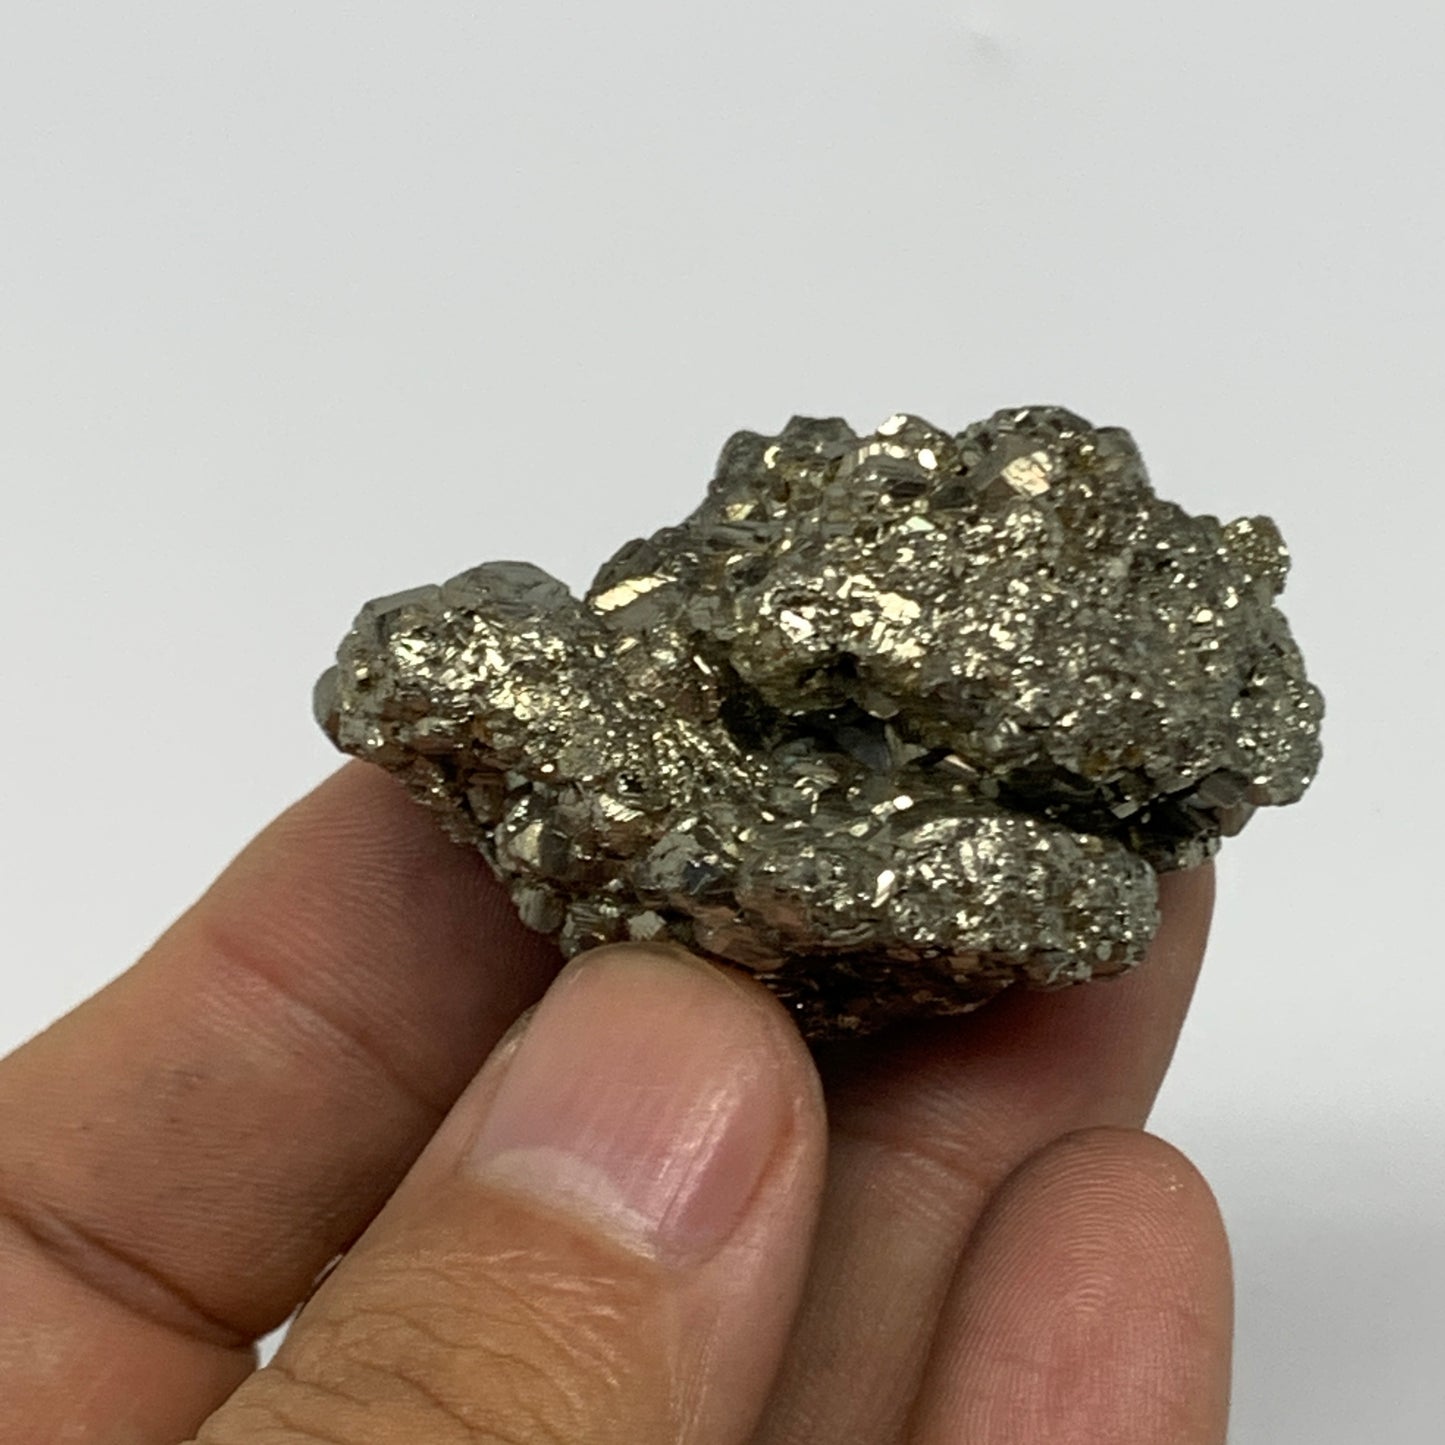 72.2g, 1.8"x1.6"x1.2", Natural Untreated Pyrite Cluster Mineral Specimens,B19394